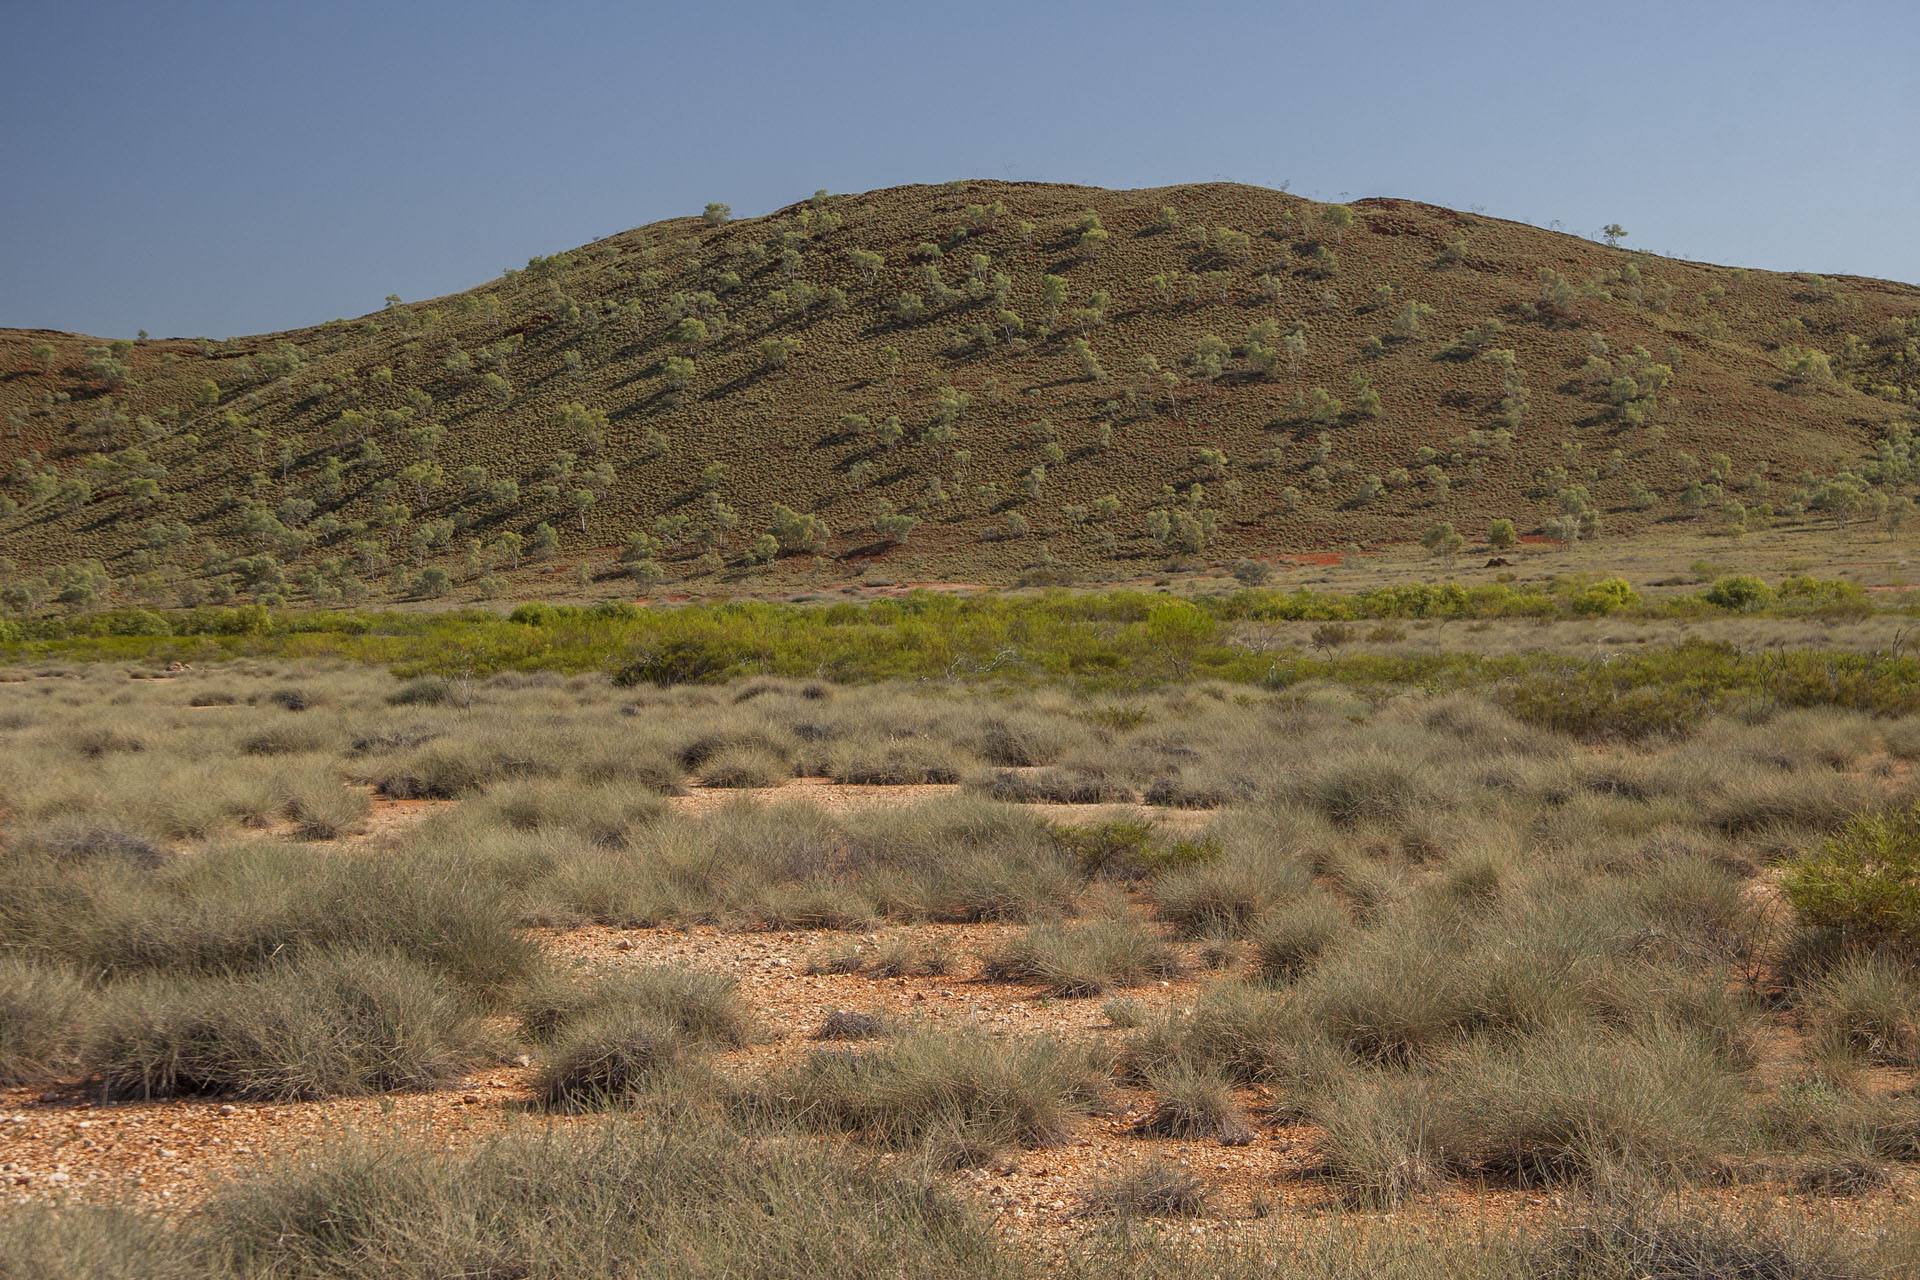 Hills, trees, spinifex.